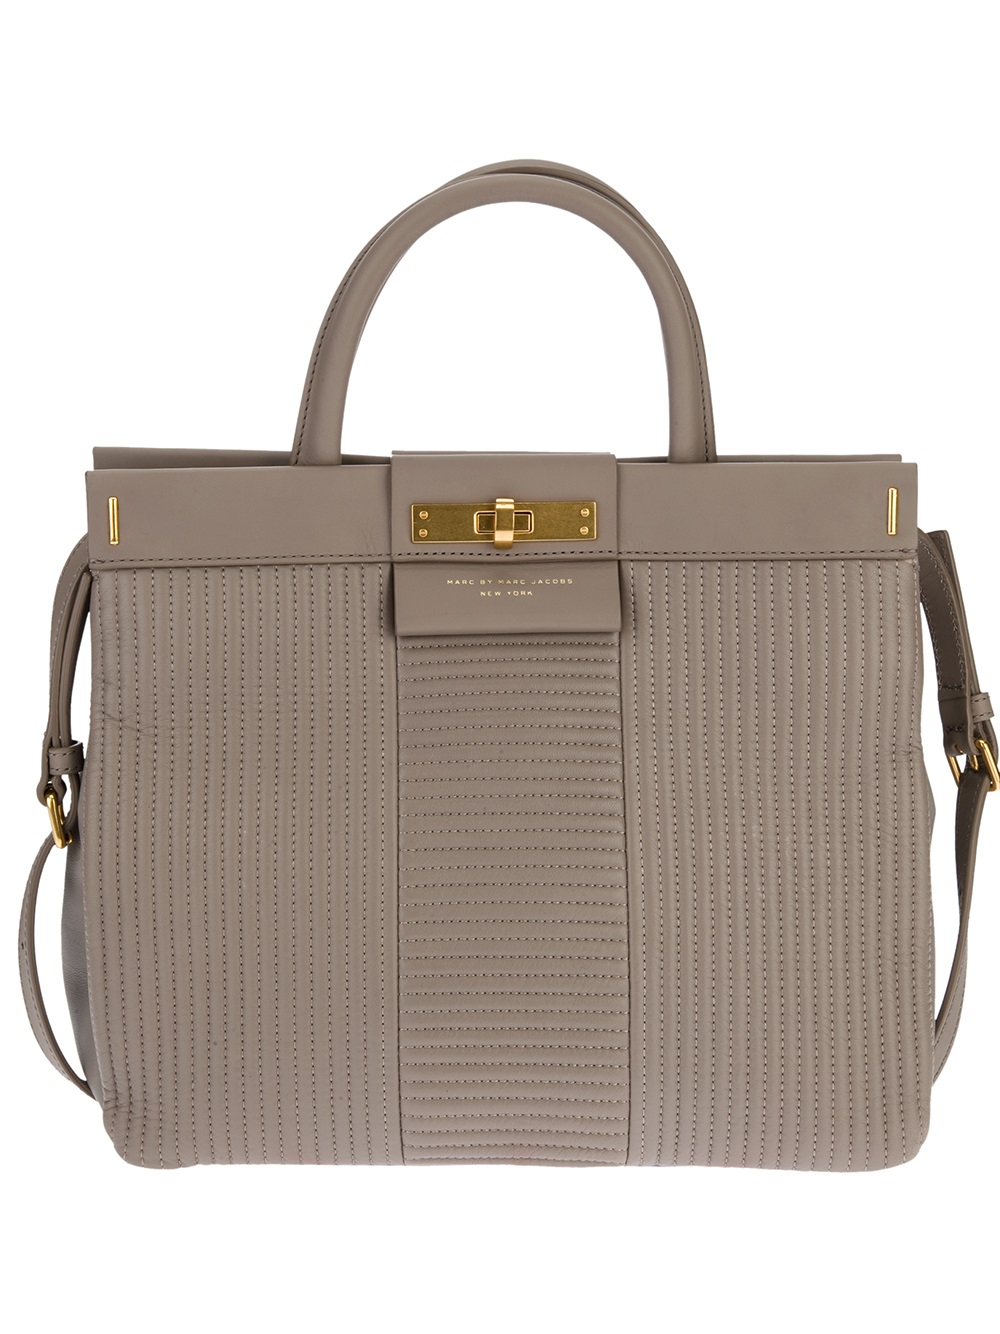 Lyst - Marc by marc jacobs Calf Leather Tote Bag in Gray